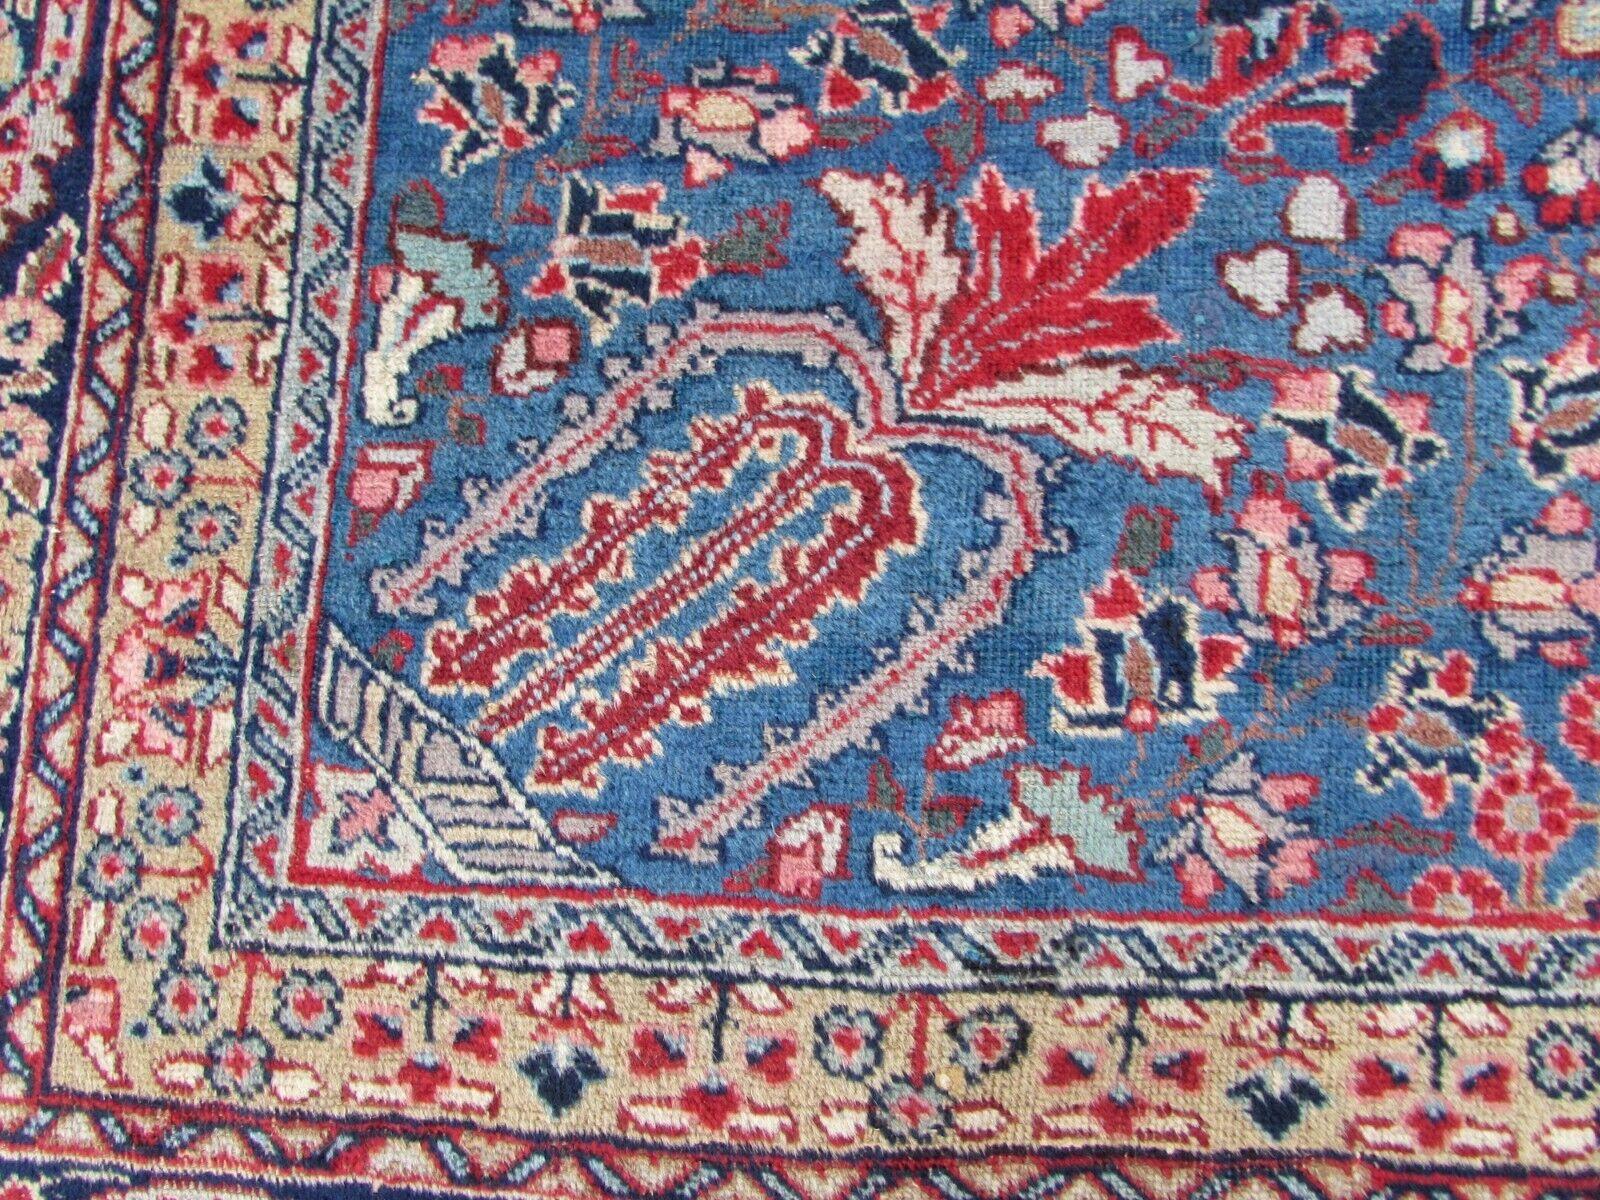 Handmade Vintage Persian Style Kazvin Rug 9.3' x 12.3', 1970s - 1Q68 In Good Condition For Sale In Bordeaux, FR